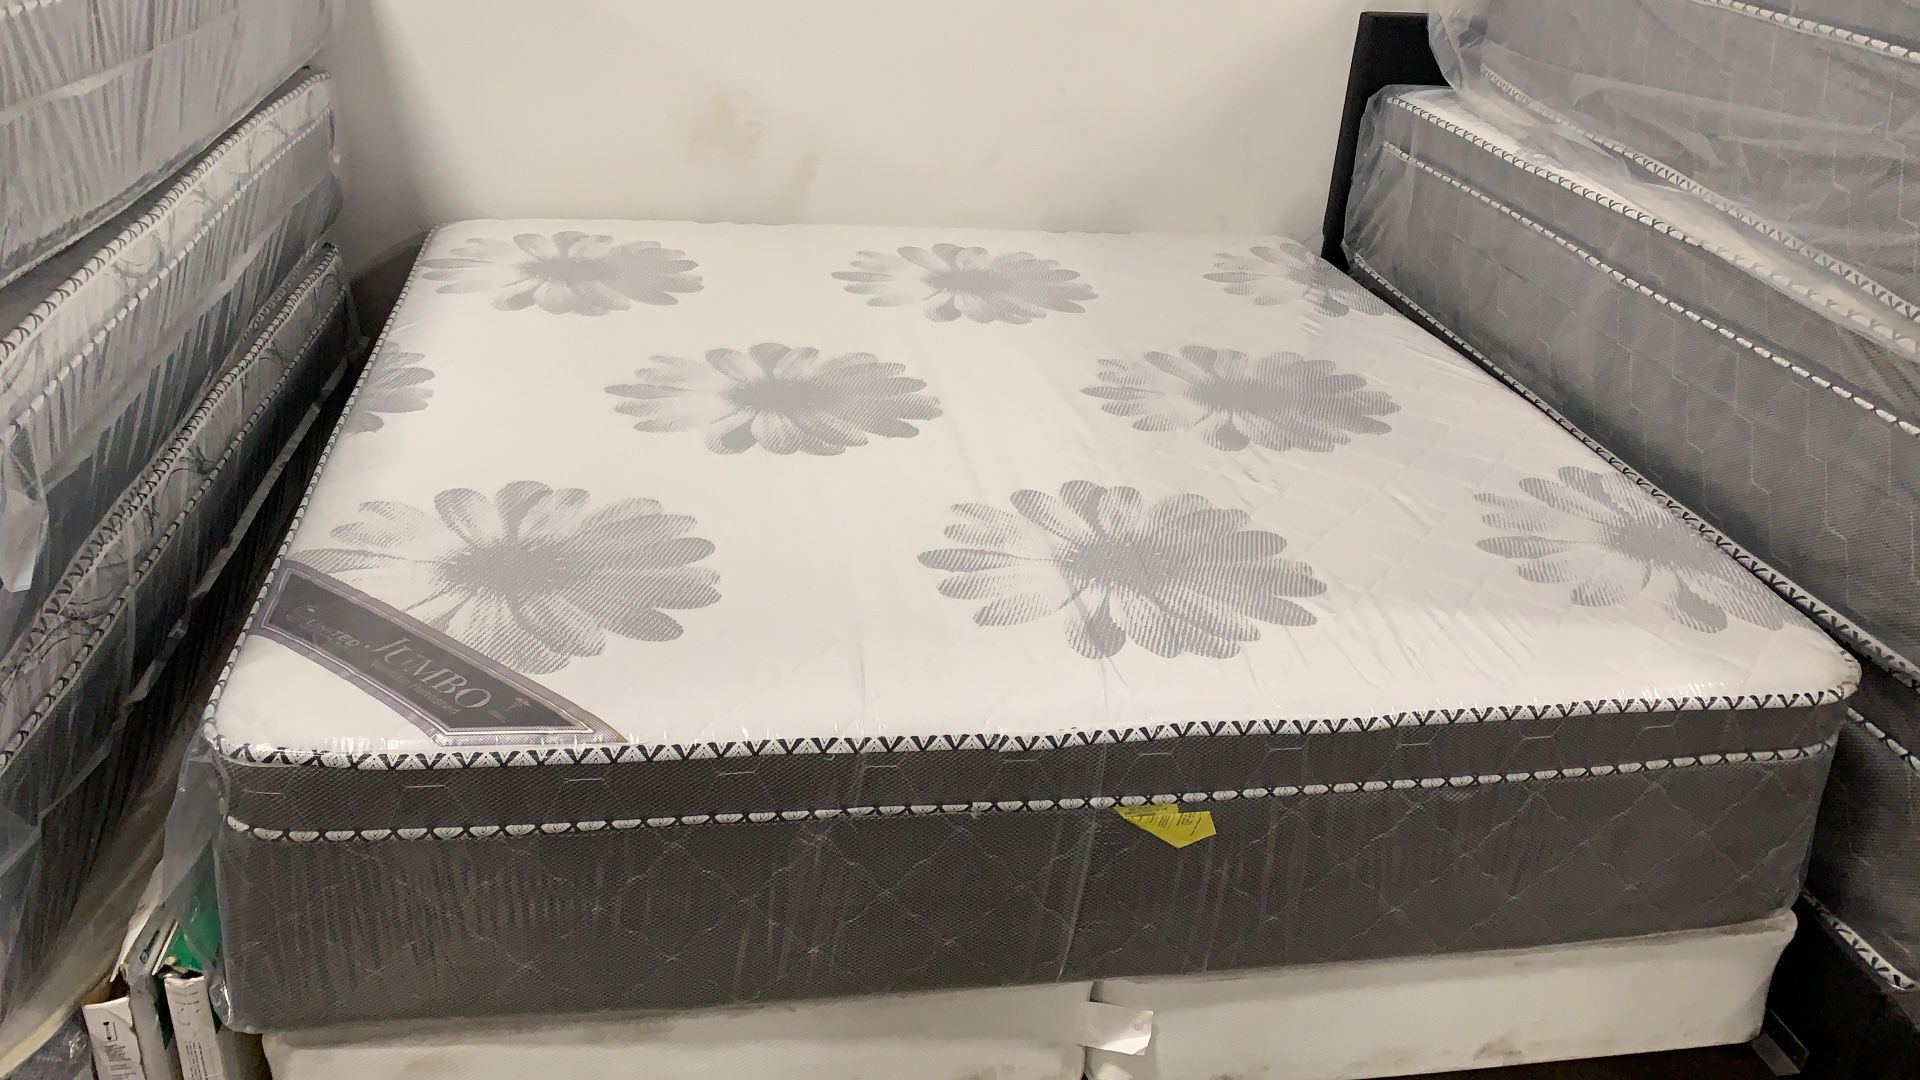 16” EURO JUMBO Extra Firm KING Orthopedic Pillowtop Mattress. 🔥🔥🔥DELIVERY AND FINANCING AVAILABLE🔥🔥🔥